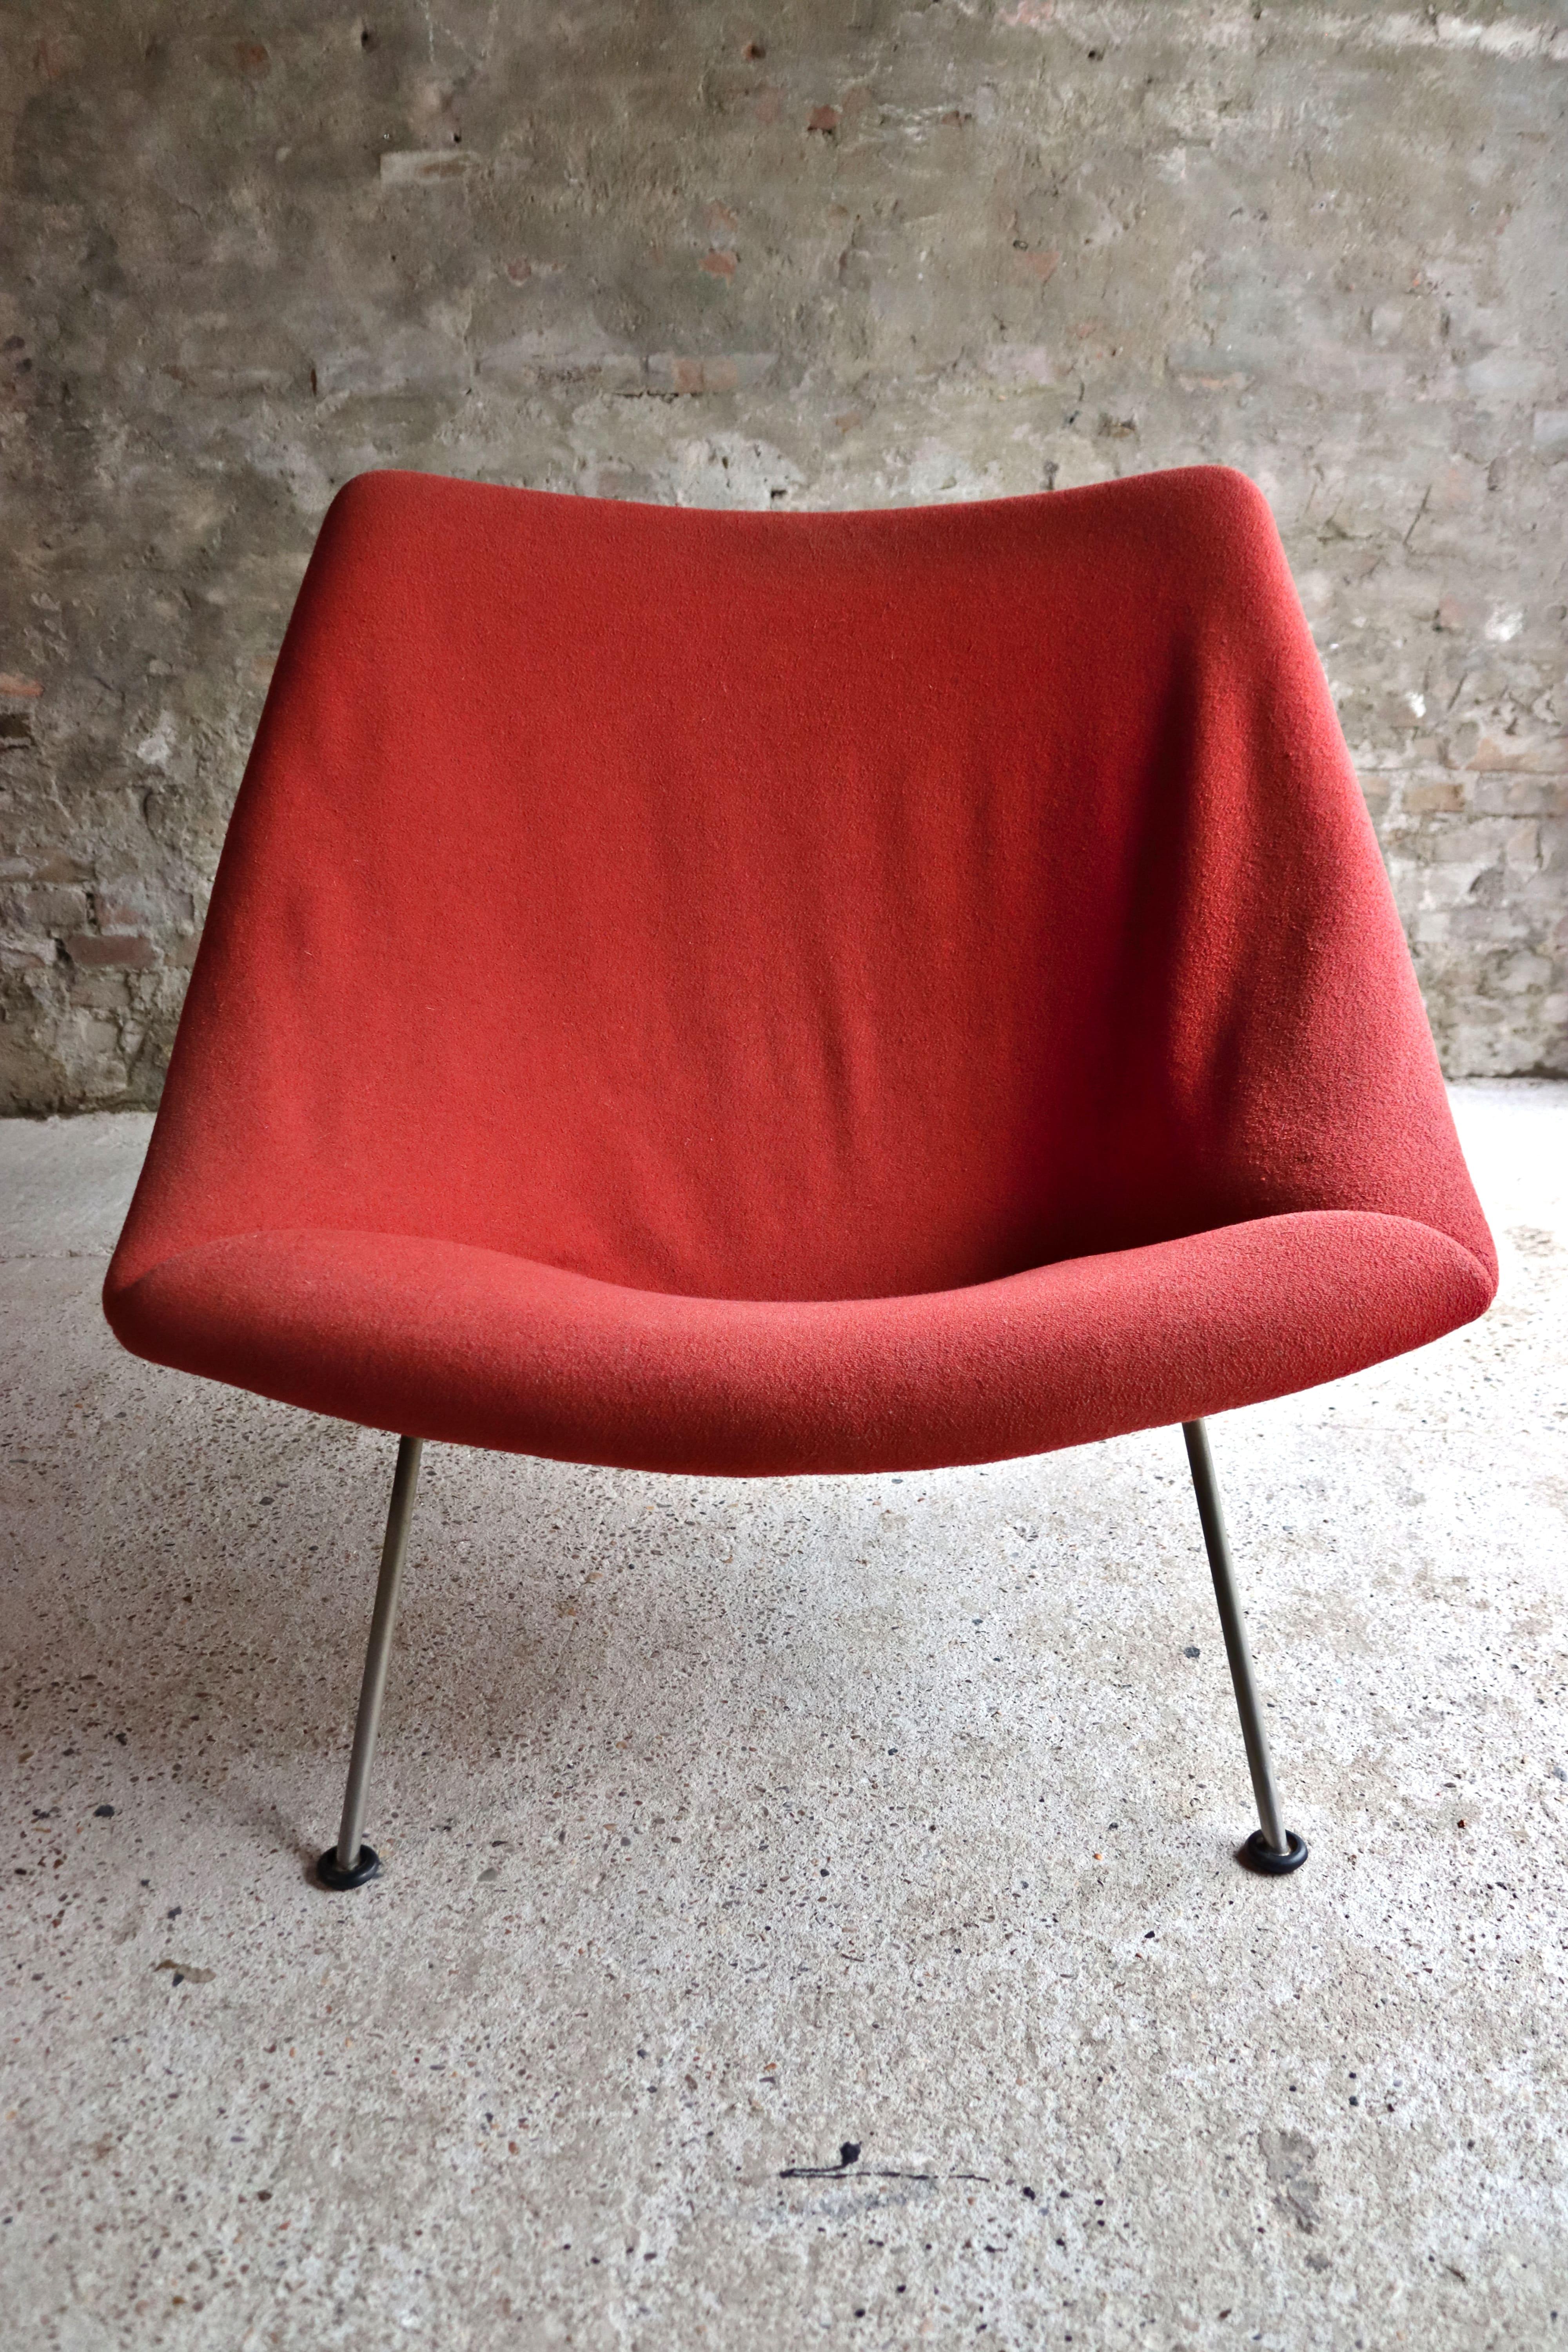 Artifort Oyster, F157, Red, Early Edition, Pierre Paulin, 1960s For Sale 9